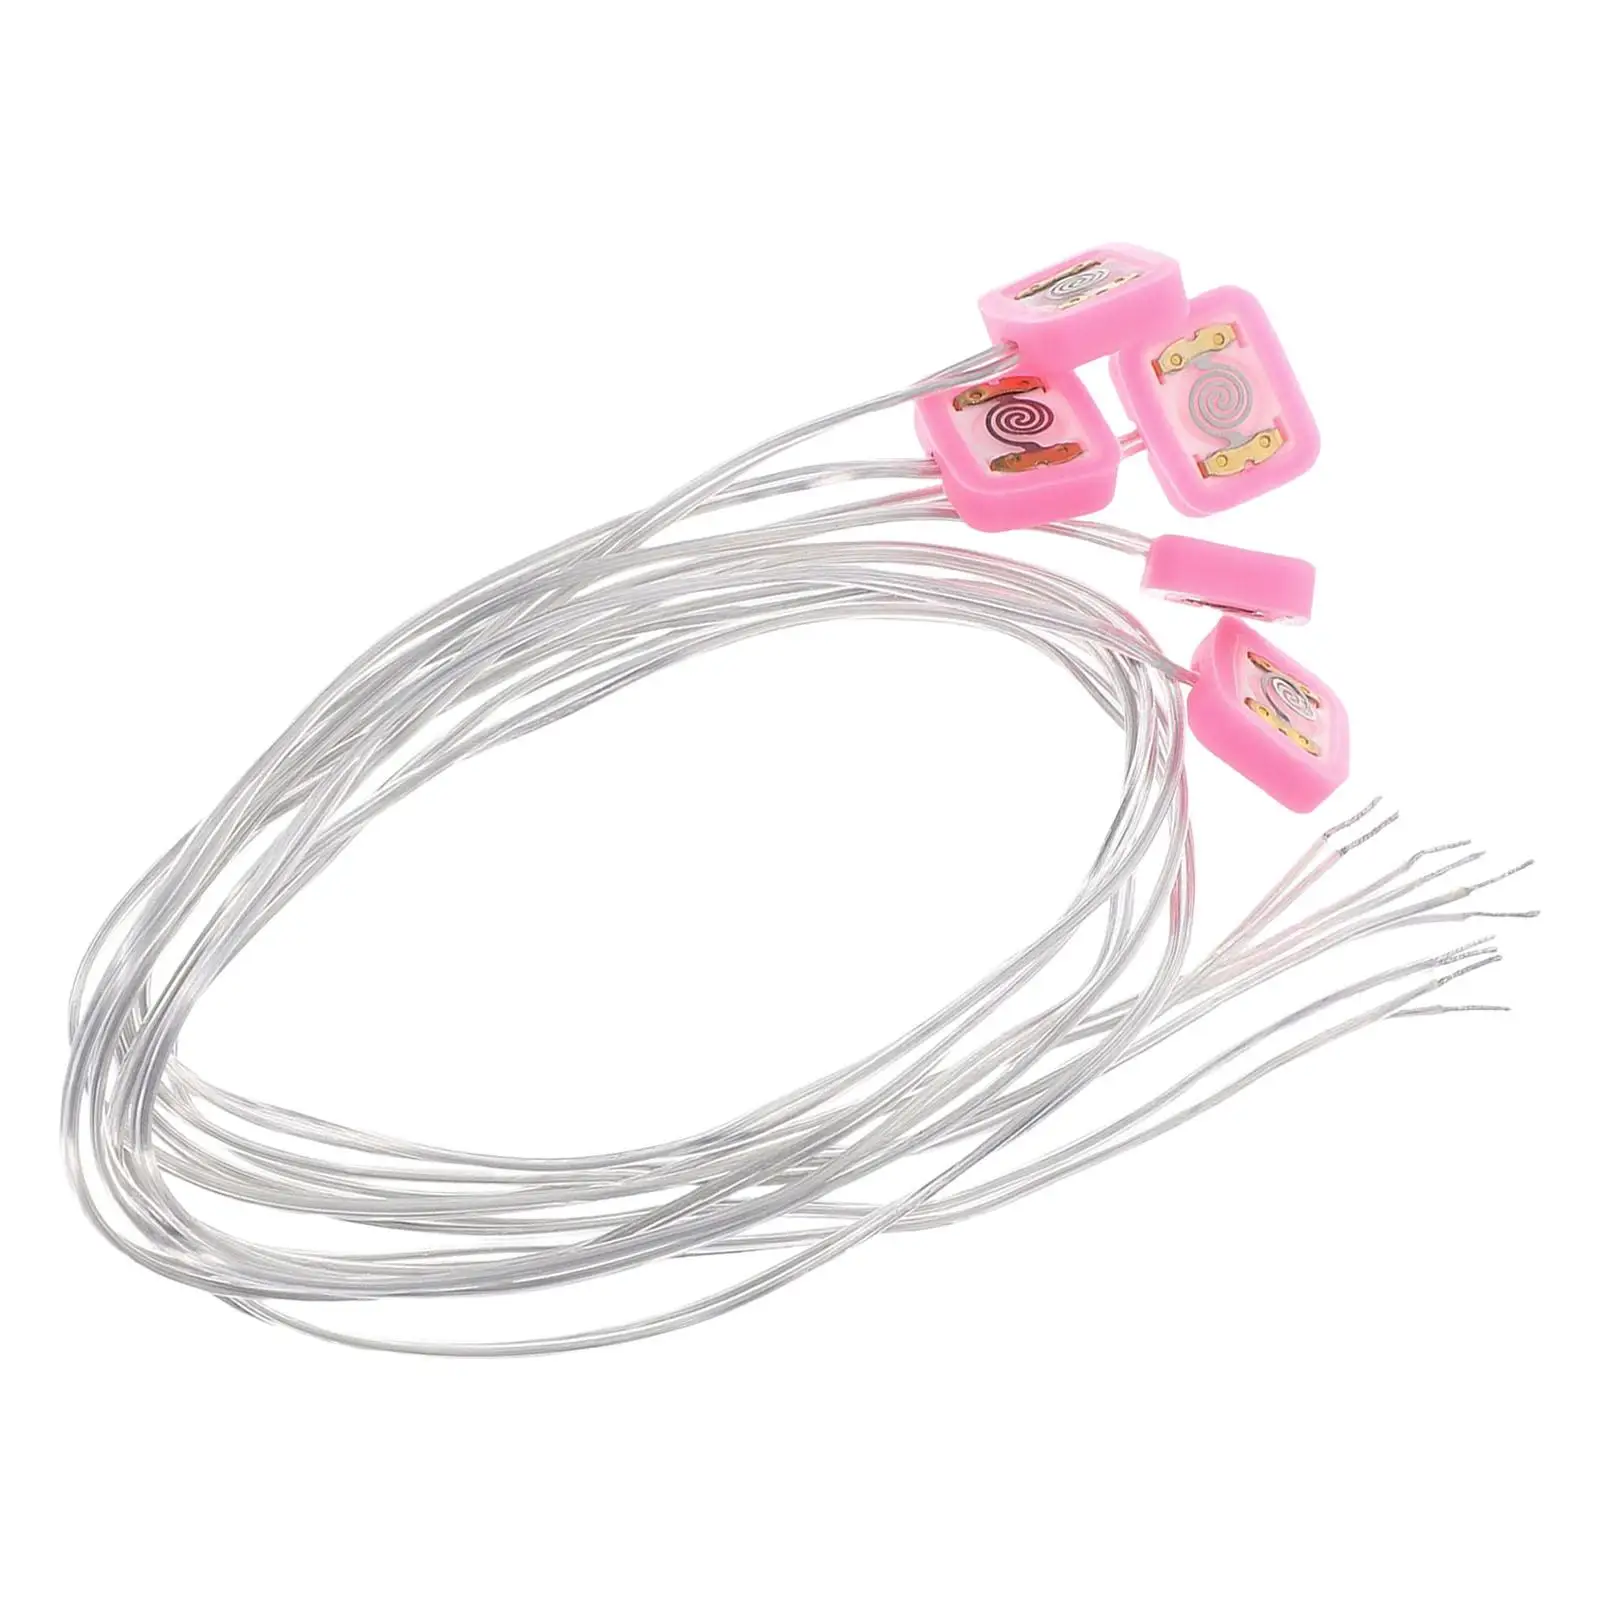 5 Pieces 50cm Extension Cords Electrical Wires Copper Wedding Fuse Party